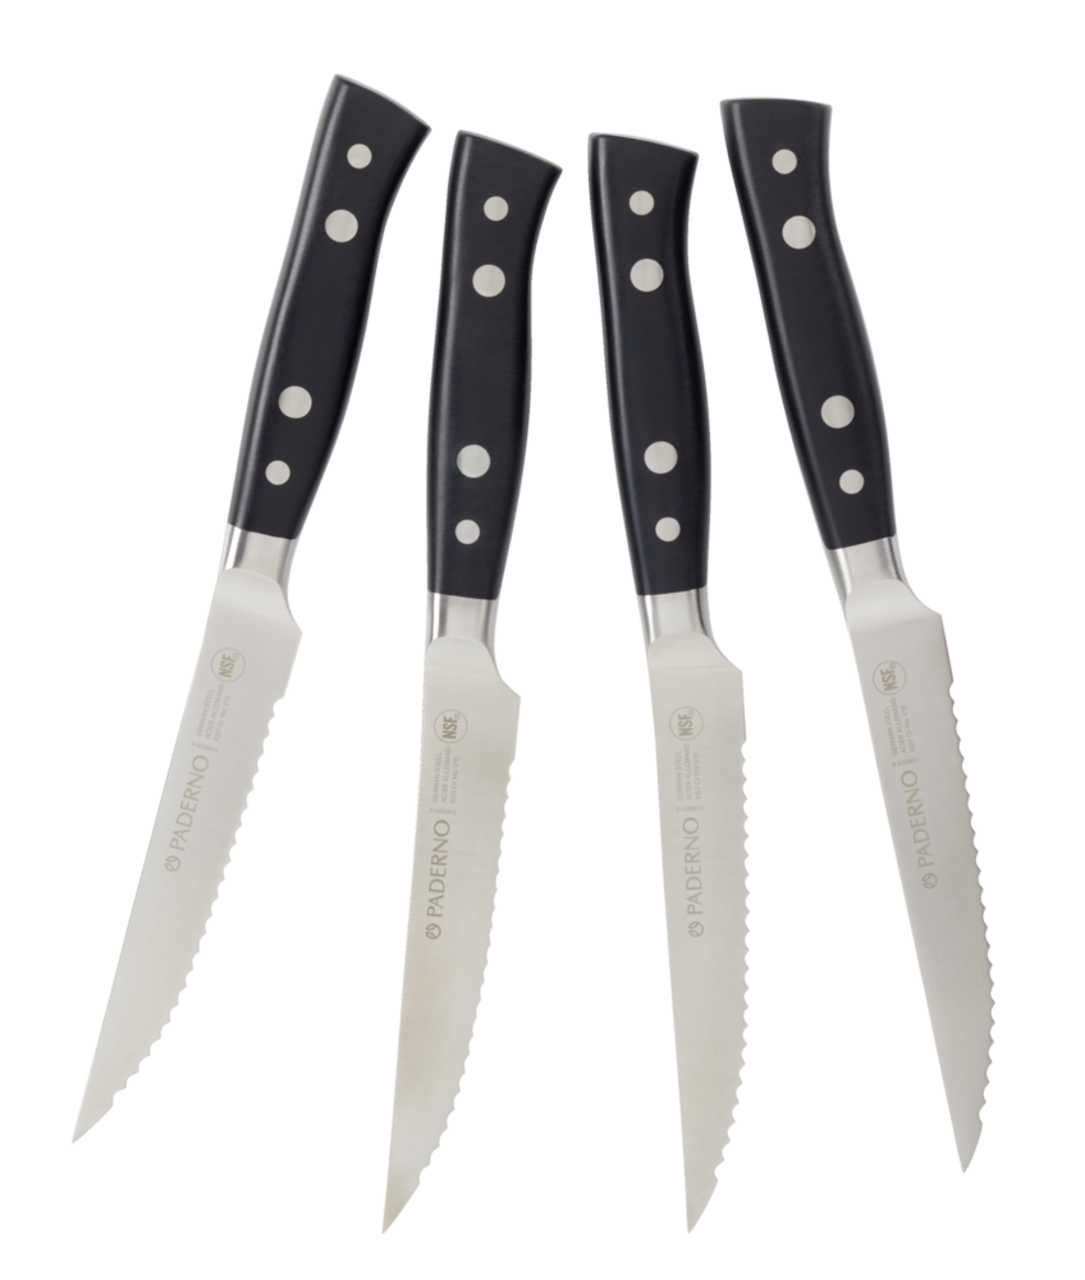 https://media-www.canadiantire.ca/product/living/kitchen/cutlery/1426376/paderno-4-pc-steak-knives-beac8139-8cfd-4d17-8a2d-9e709696c2b2.png?imdensity=1&imwidth=1244&impolicy=mZoom